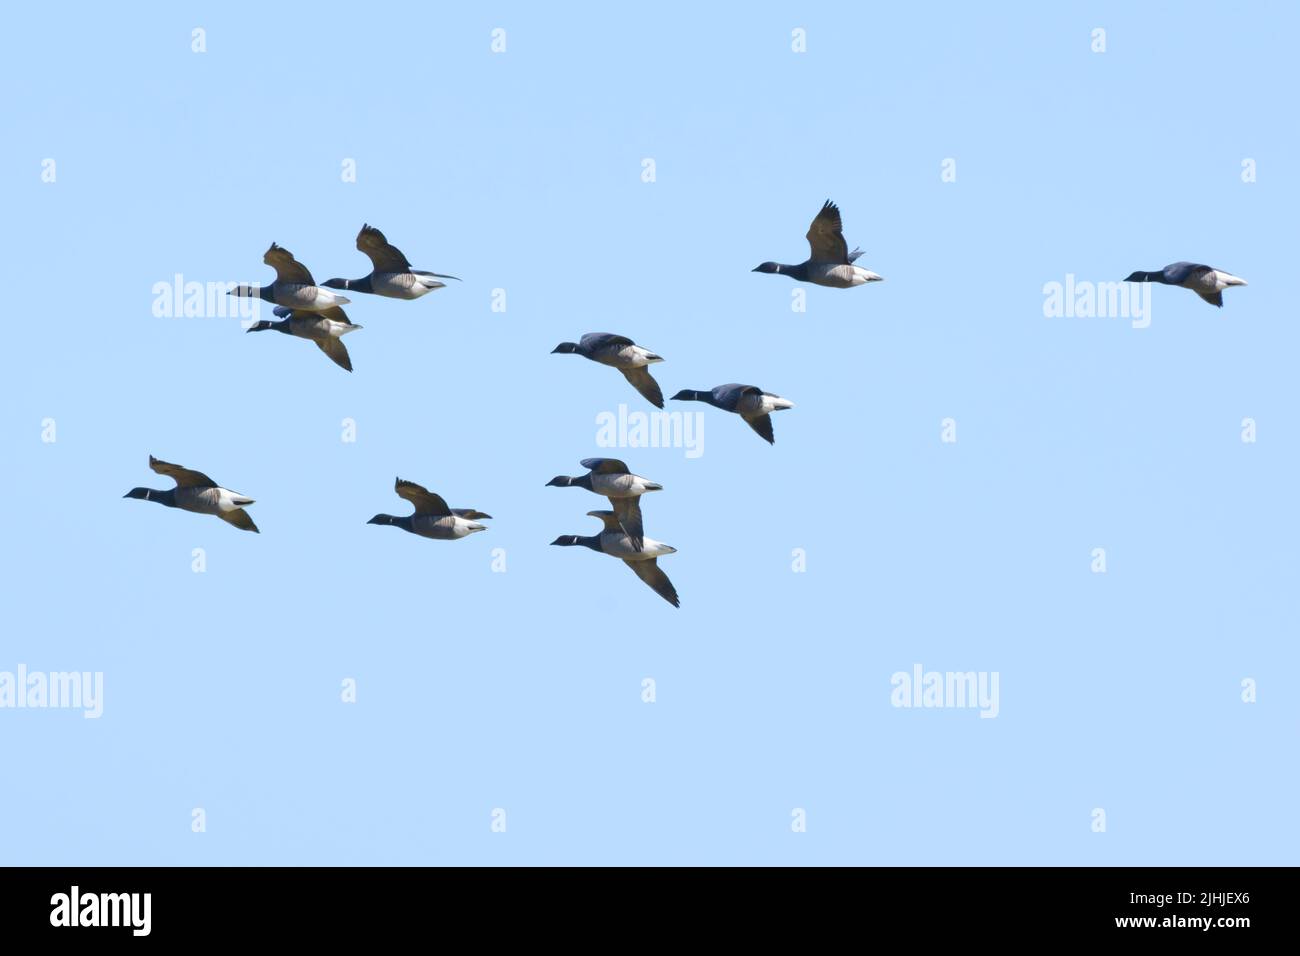 Flying Barnacle goose at the sky Stock Photo